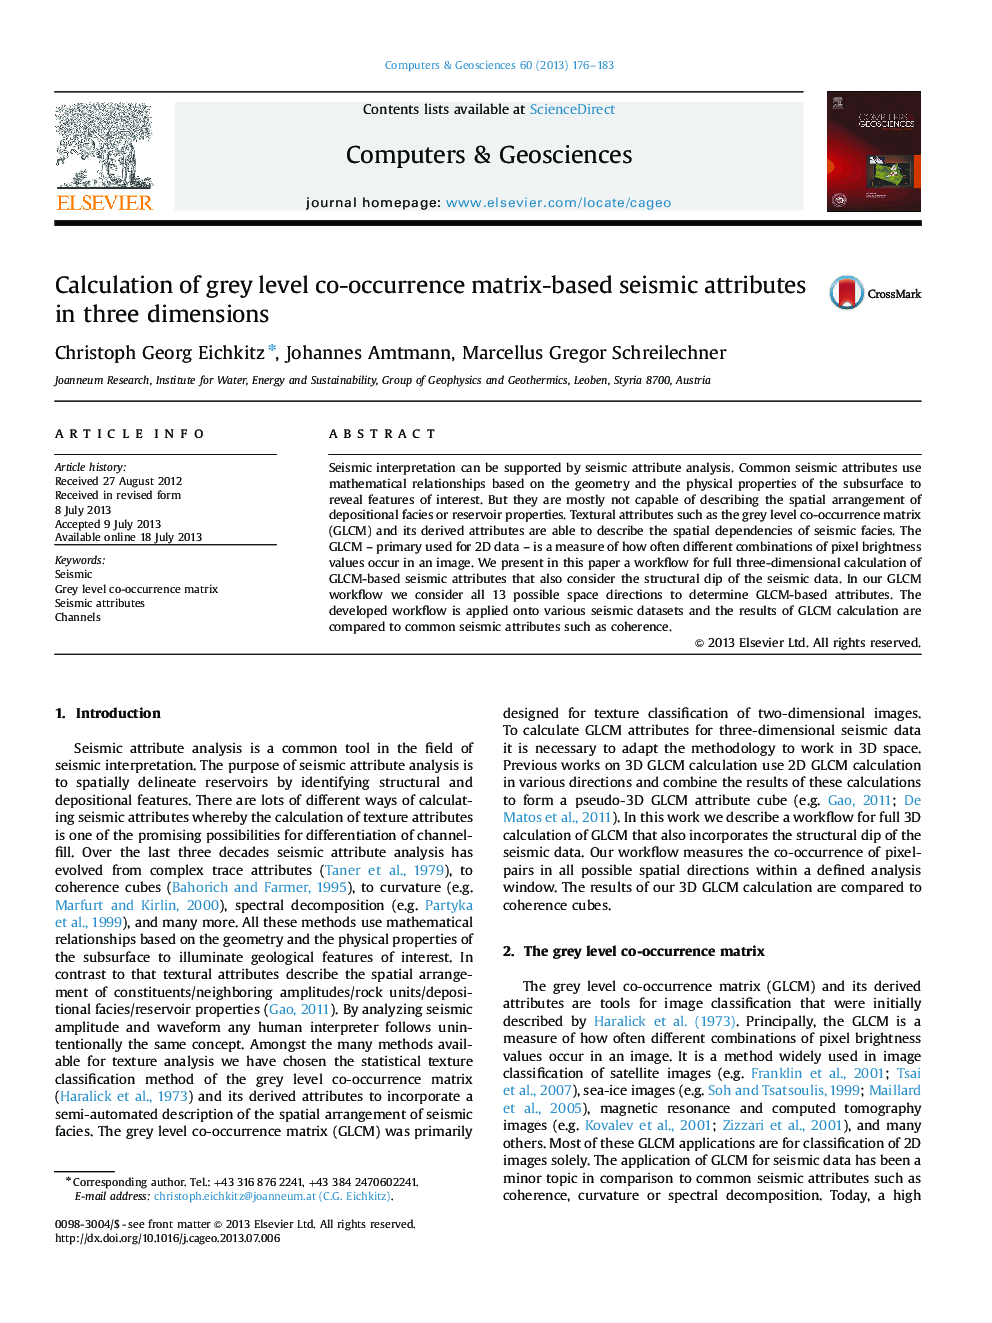 Calculation of grey level co-occurrence matrix-based seismic attributes in three dimensions